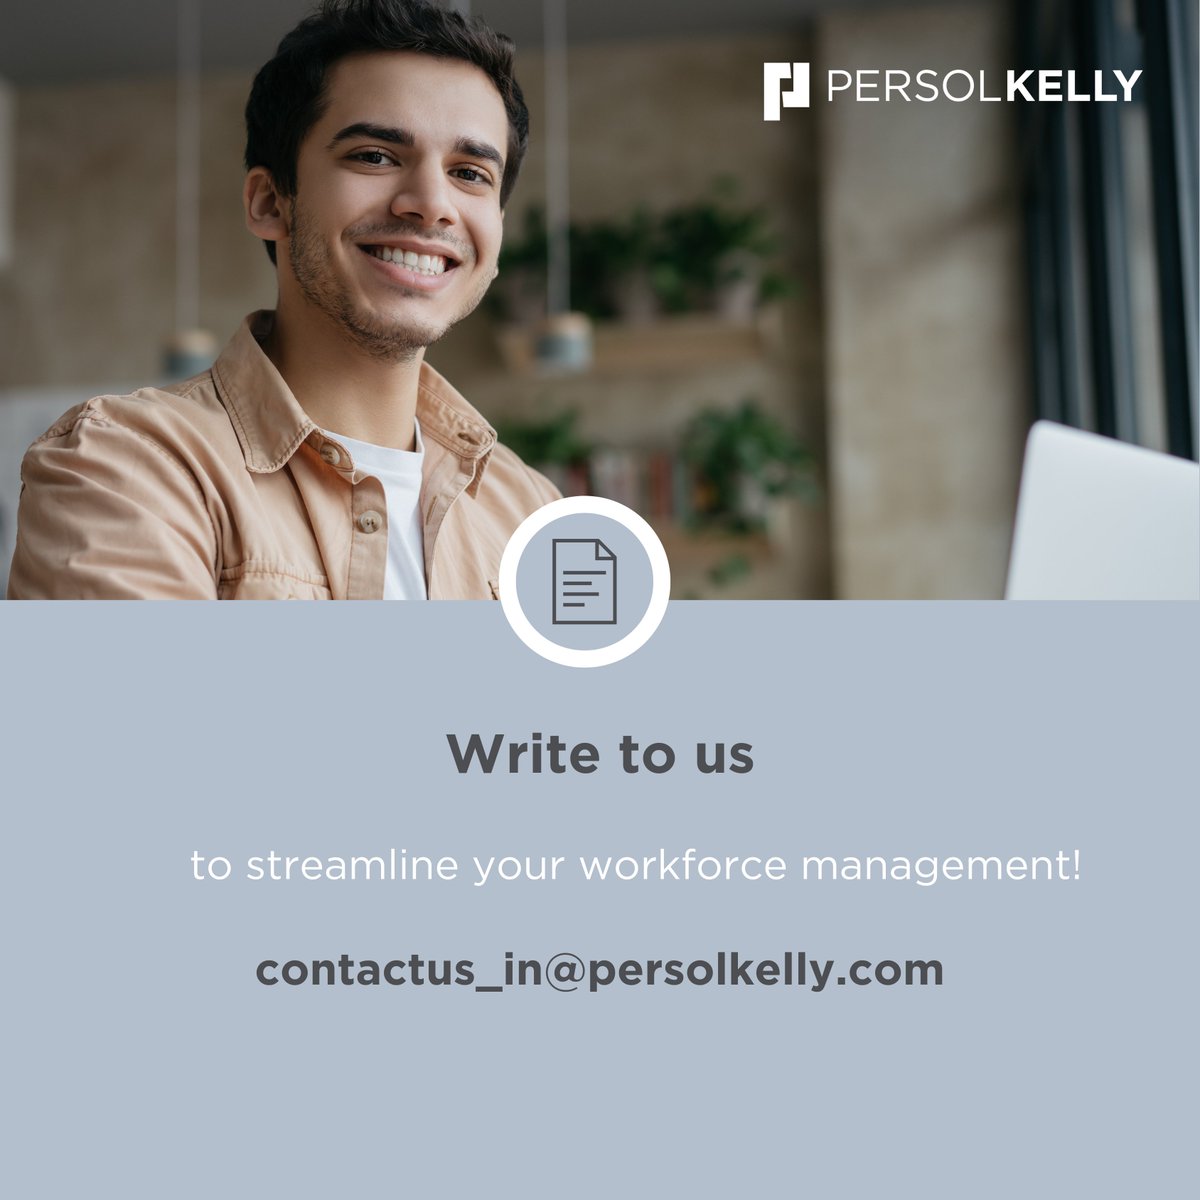 E-commerce Growth Challenges? We Have the Workforce Management Solutions. 
Struggling to manage your diverse e-commerce workforce?  
PERSOLKELLY India can help!
Contact us today!
contactus_in@persolkelly.com
 #ecommerce #workforcemanagement #staffingsolutions #growyourbusiness